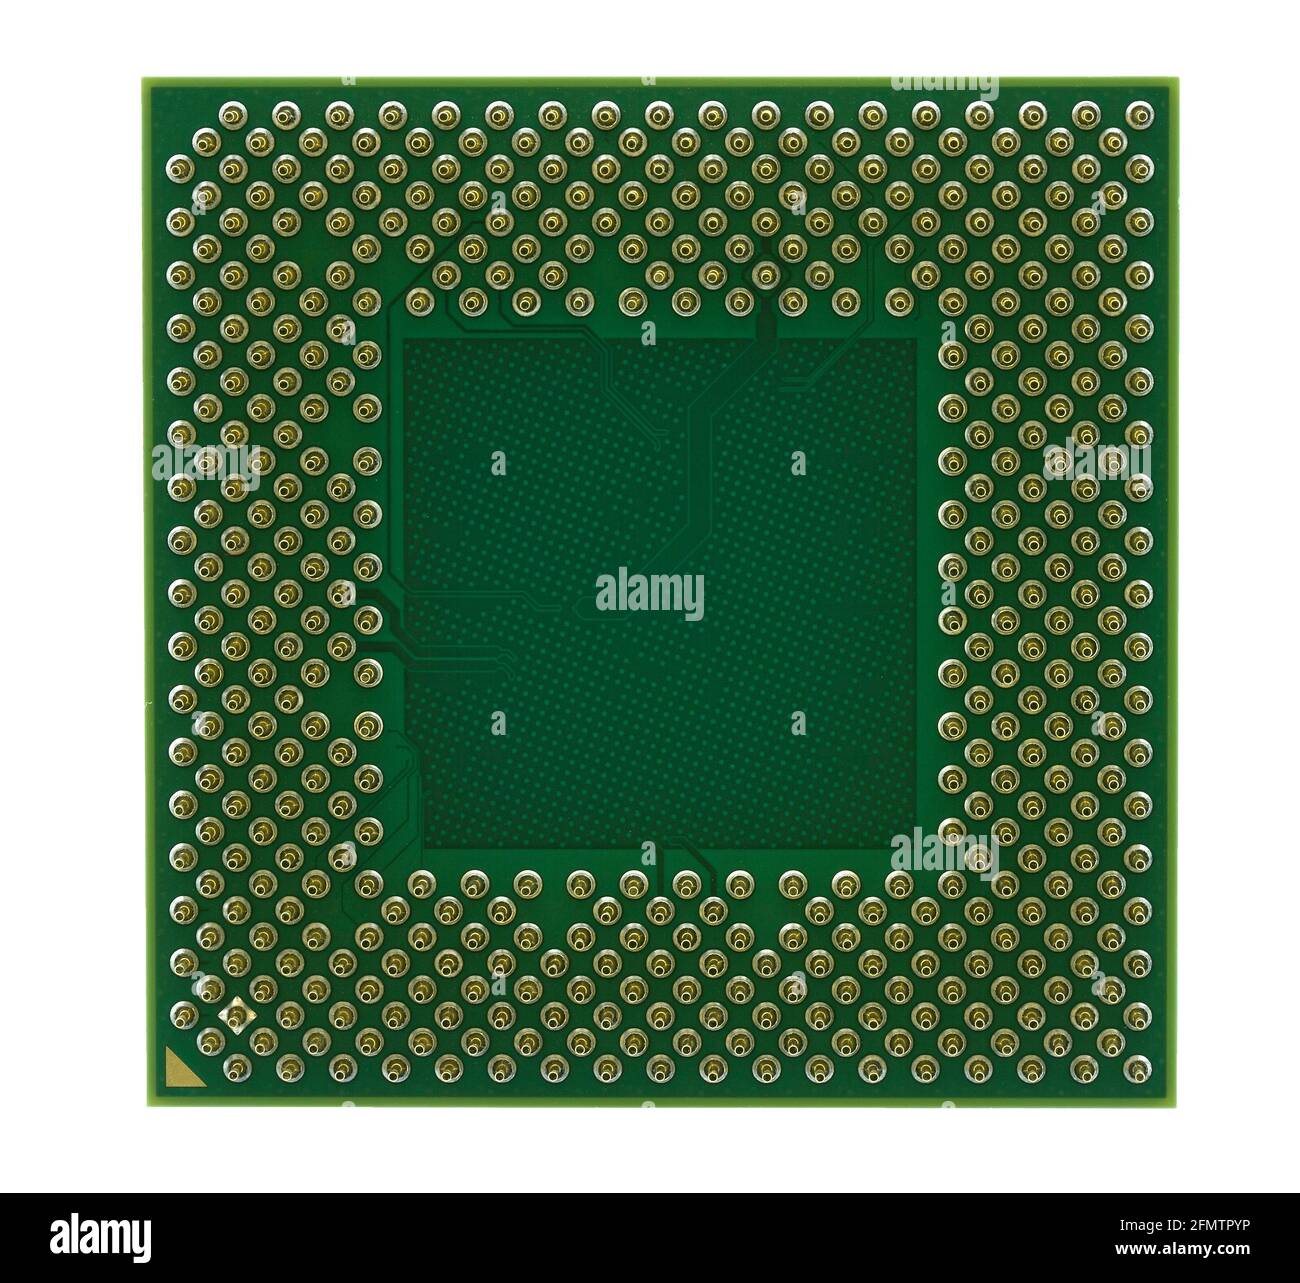 CPU processor isolated on a white background Stock Photo